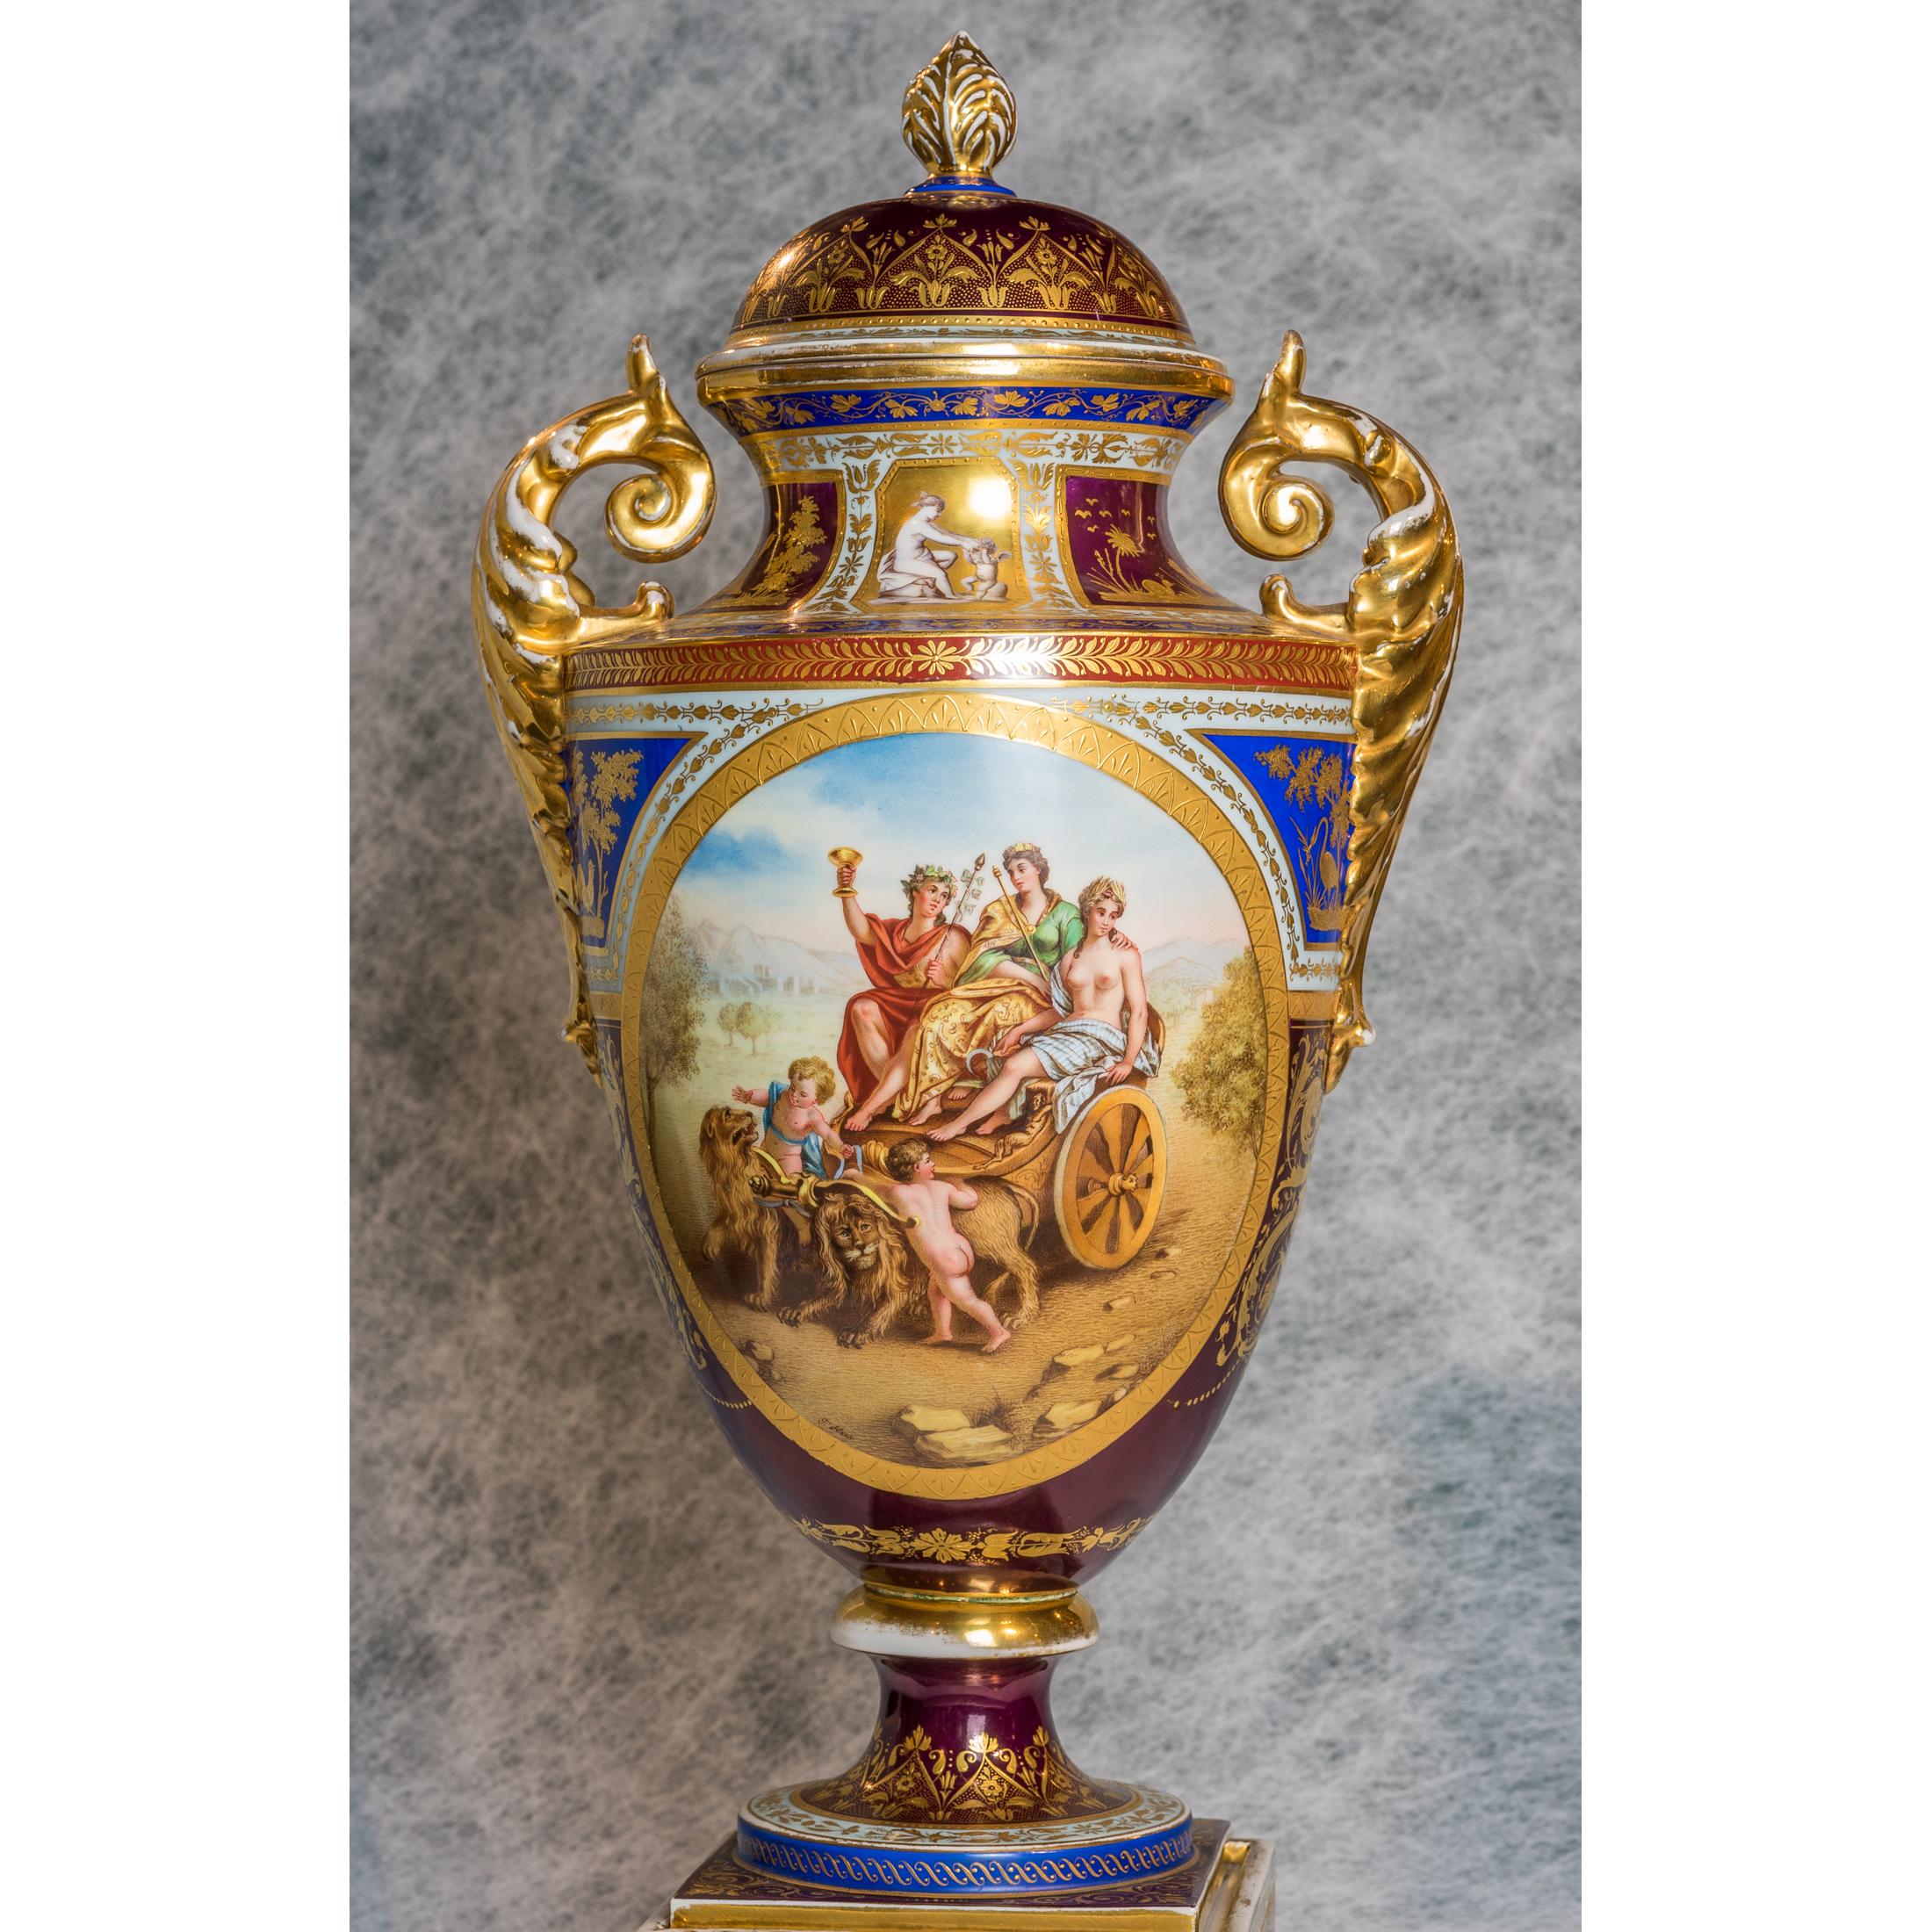 A fine pair of royal Vienna porcelain vases and covers with mythological scenes. With blue ground, gilded and decorated with mythological scenes, Austria, late 19th century.

Origin: Austria
Date: Late 19th century
Dimension: 21 in. x 8 1/2 in.